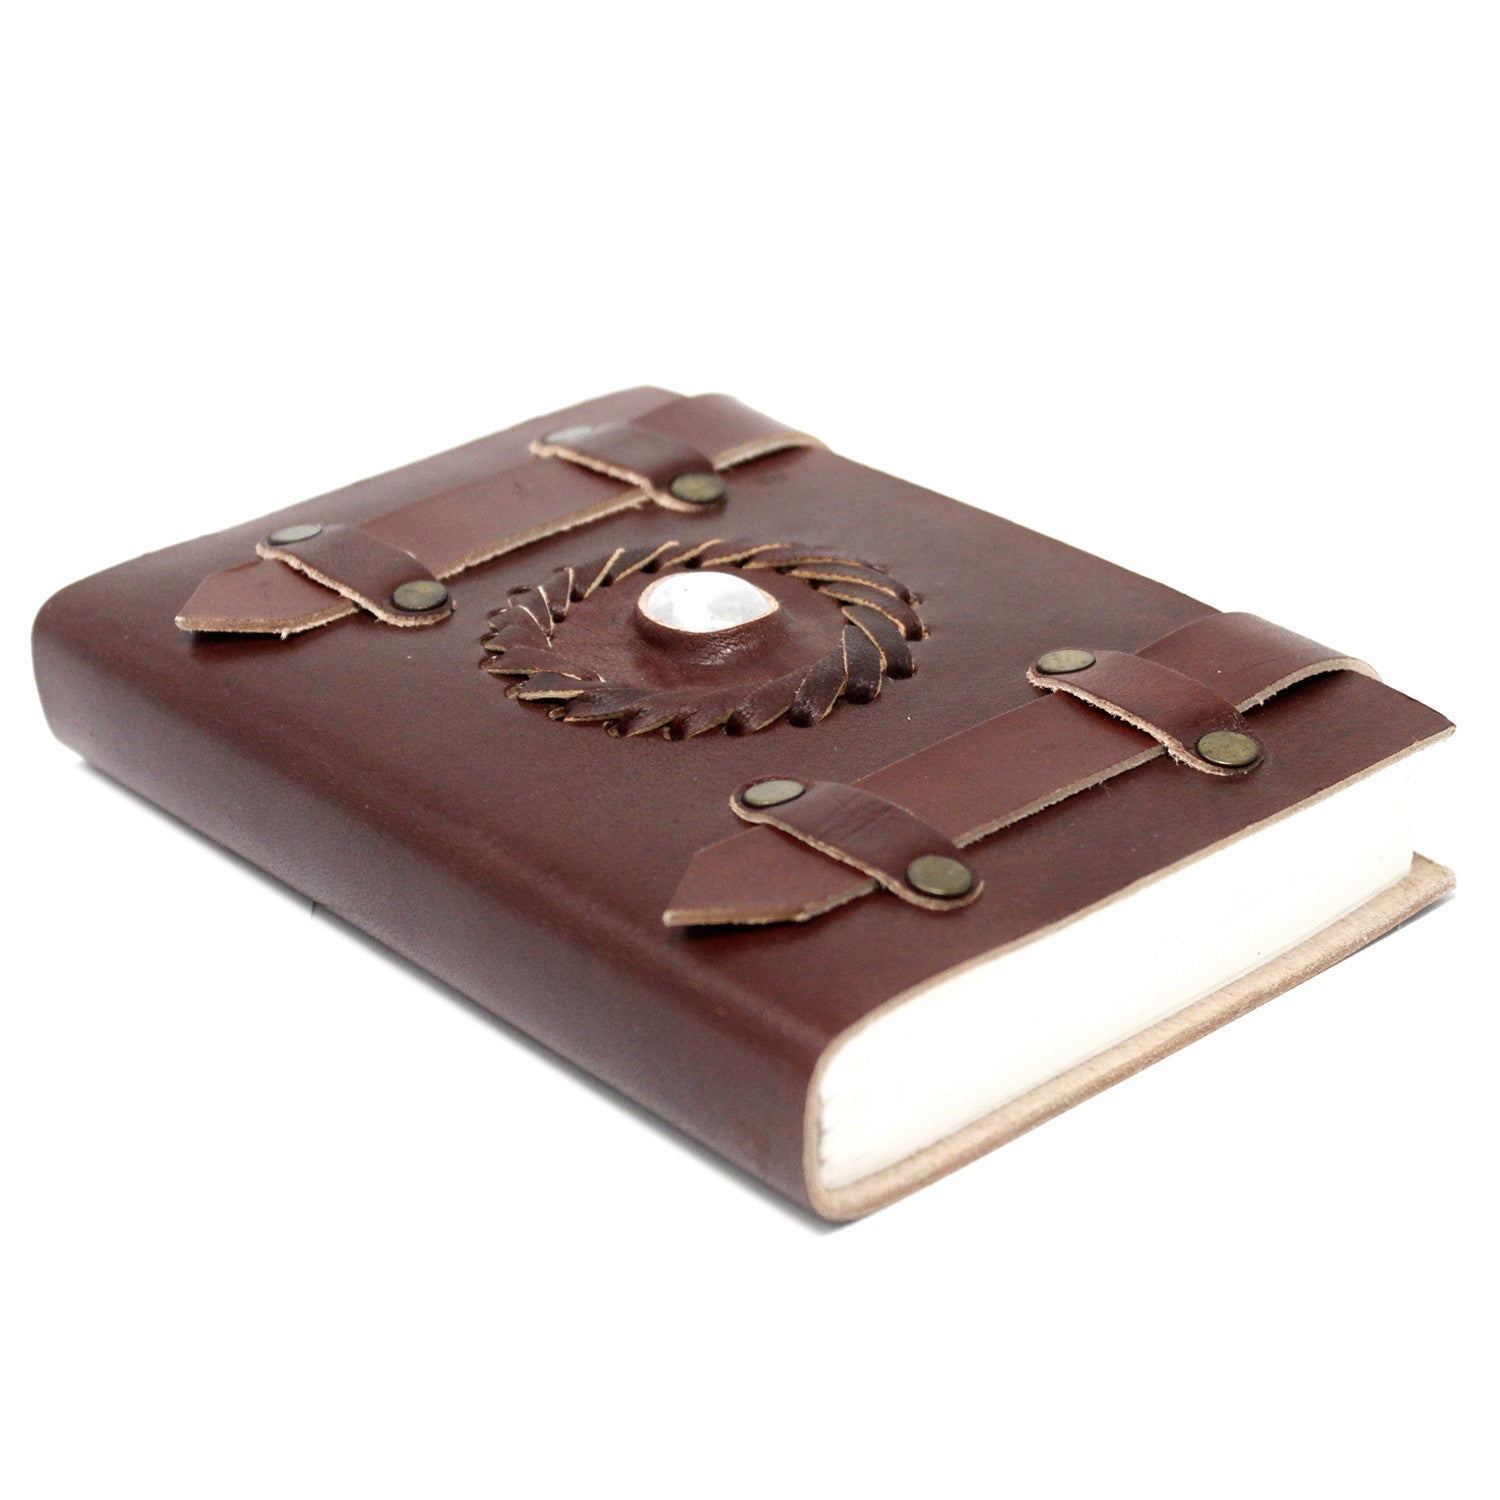 View Leather Moonstone with Belts Notebook 6x4 information